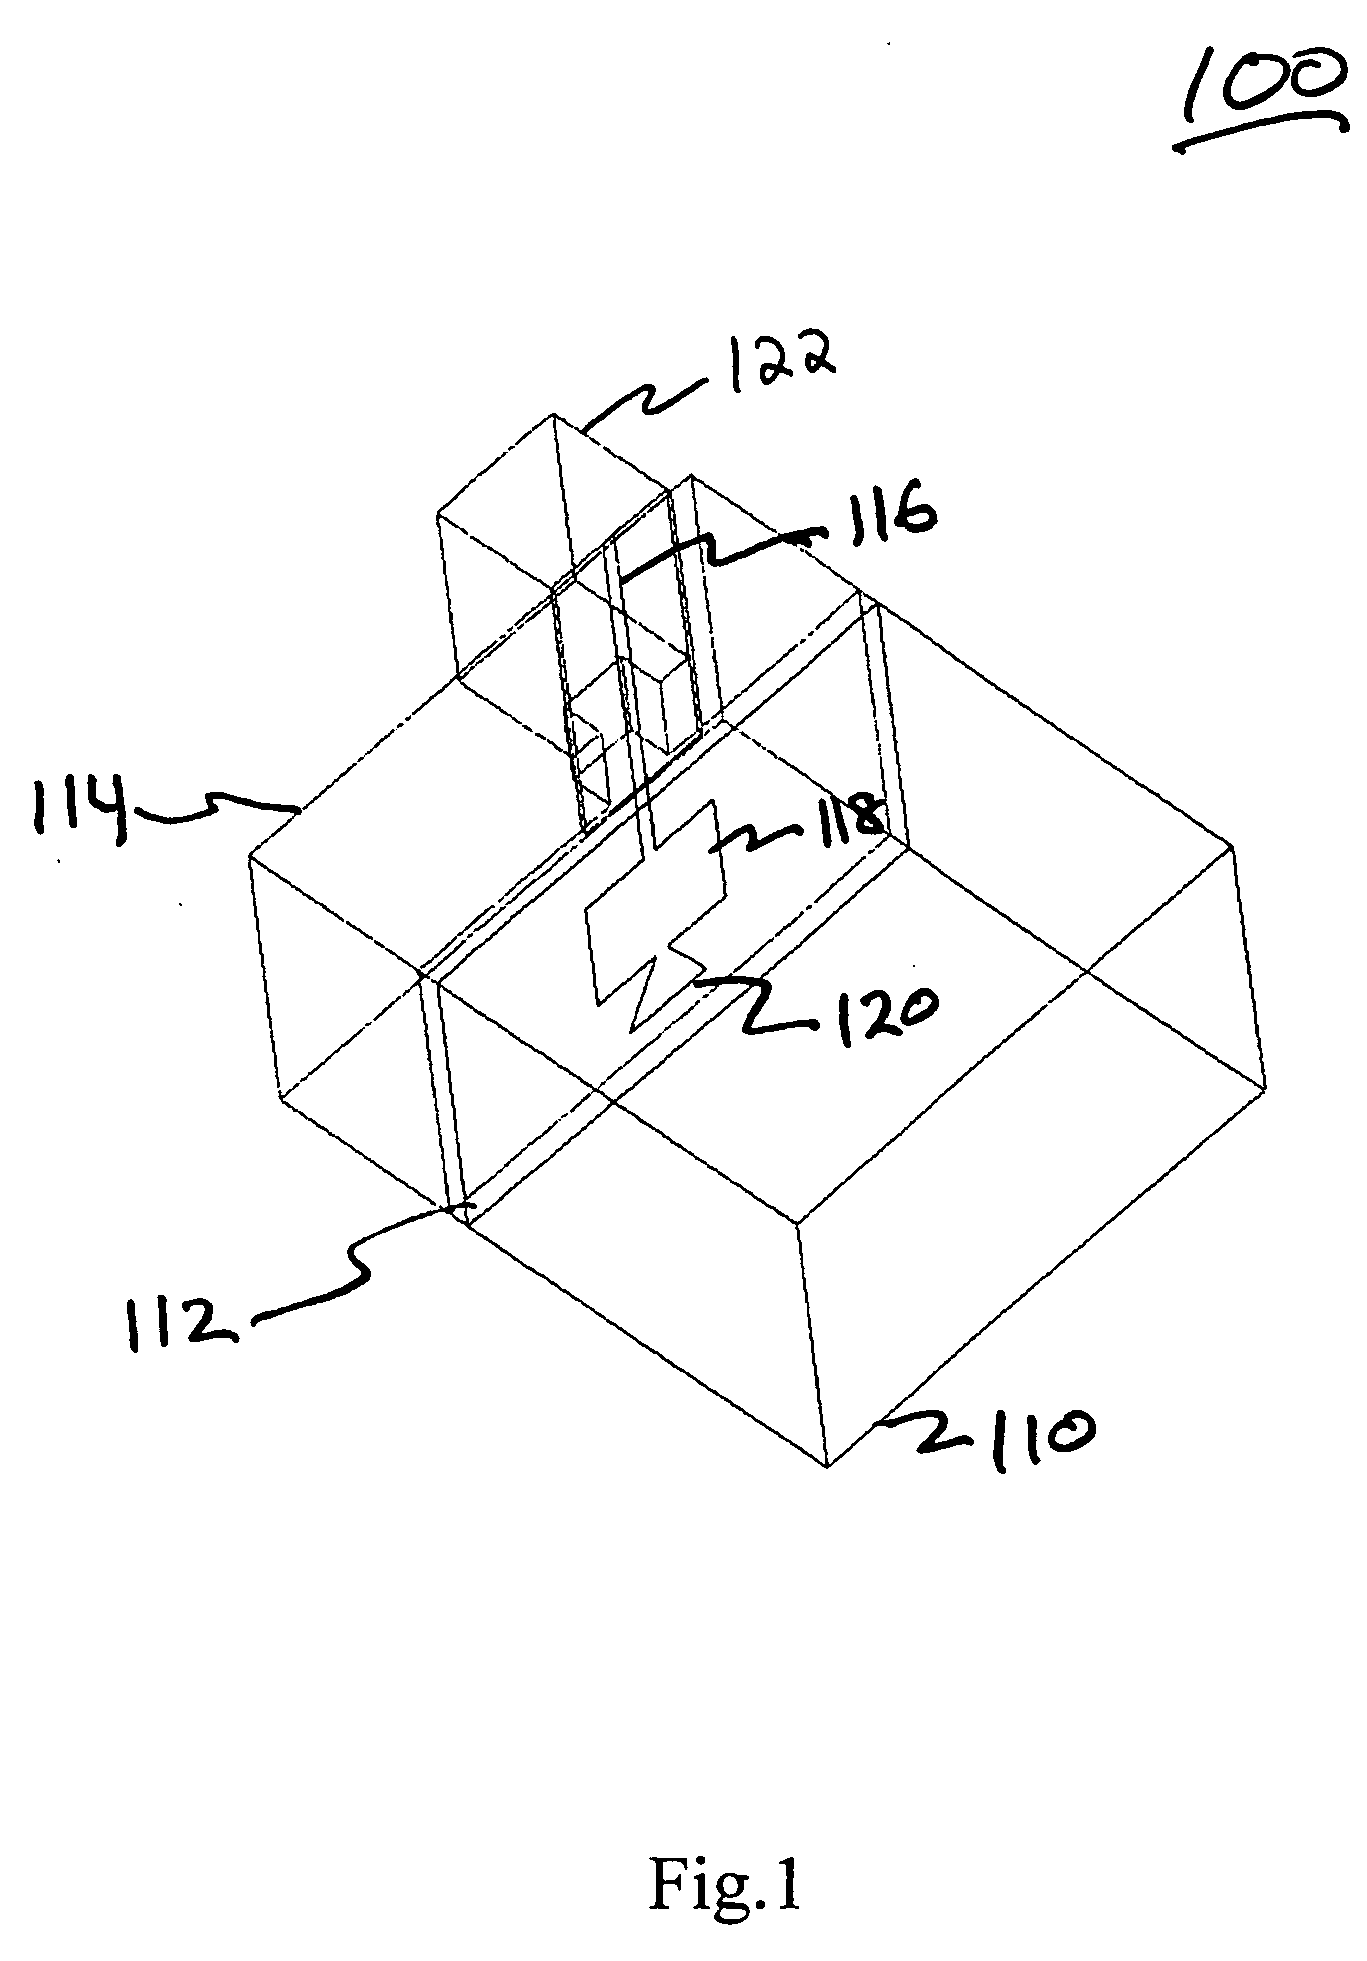 Apparatus and method for waveguide to microstrip transition having a reduced scale backshort